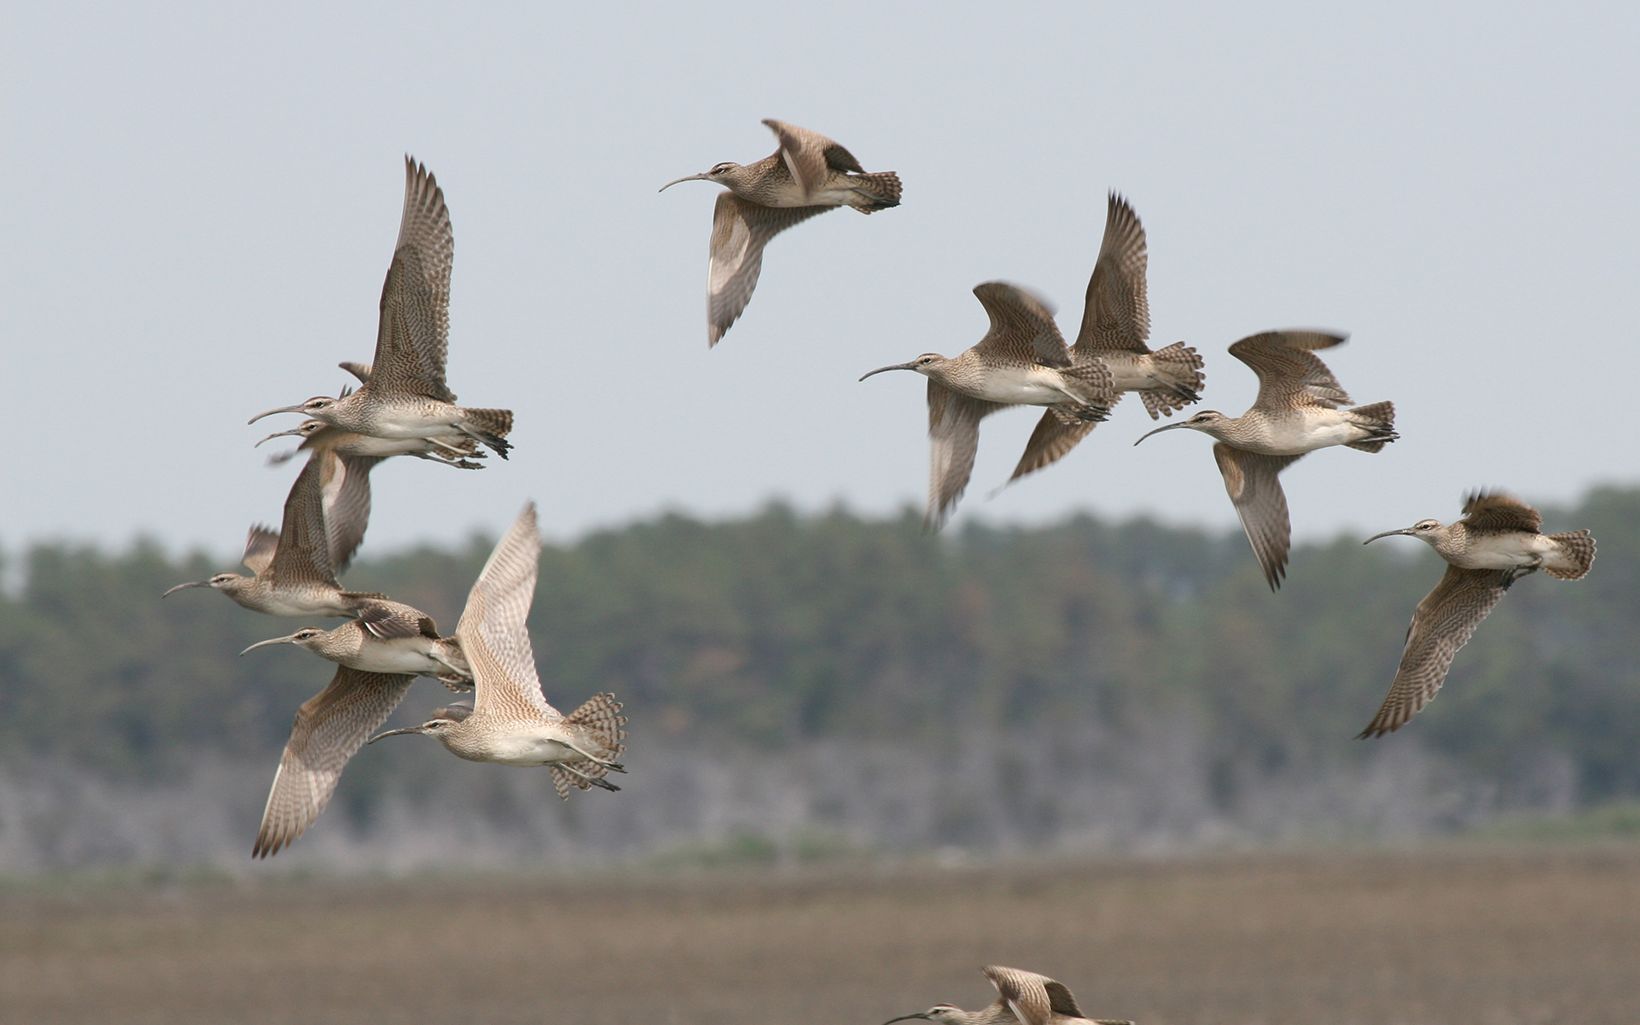 White and gray shorebirds with long thin beaks flying in a closely spaced group.